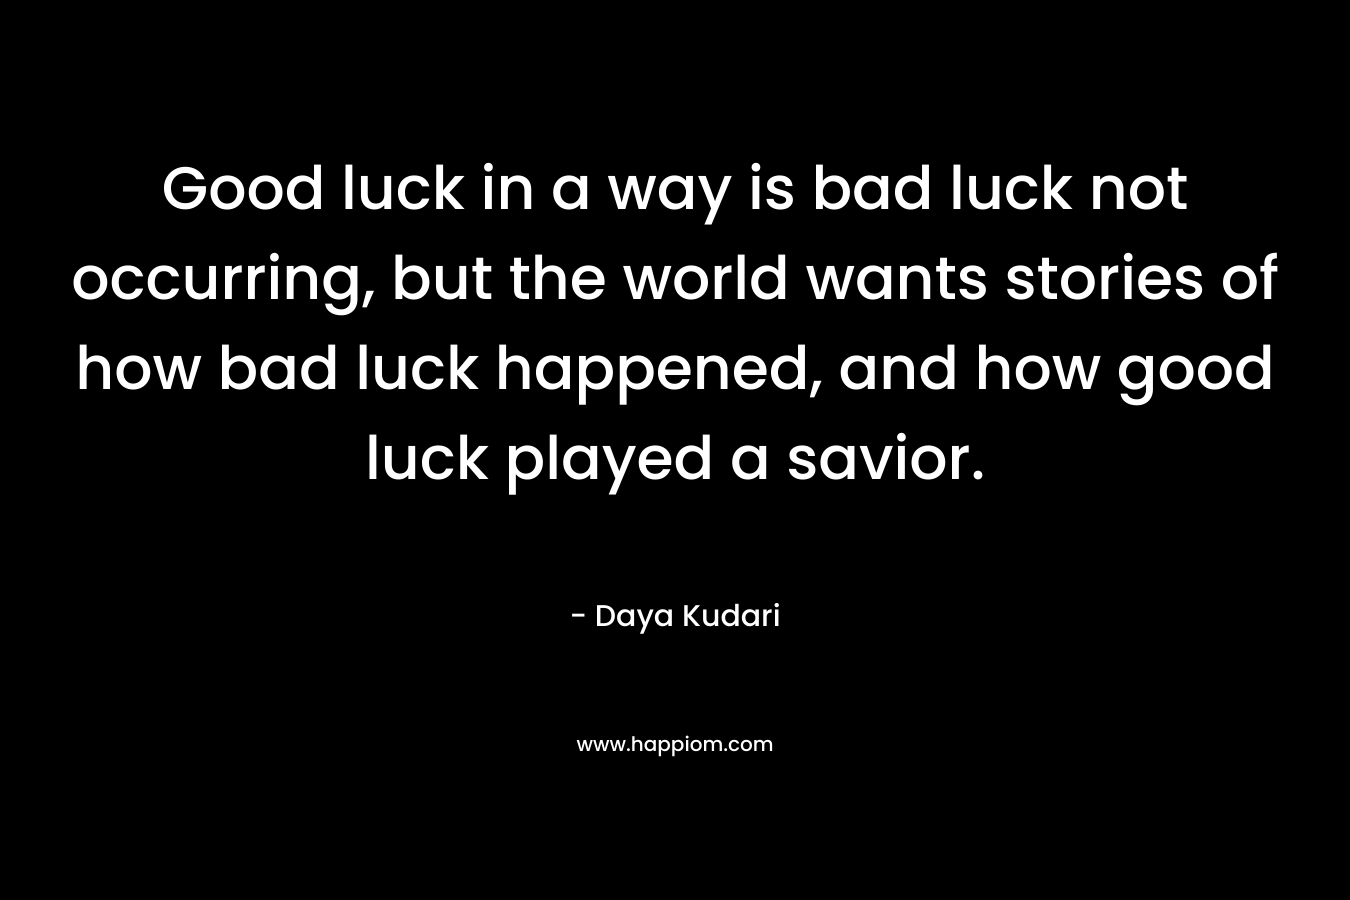 Good luck in a way is bad luck not occurring, but the world wants stories of how bad luck happened, and how good luck played a savior. – Daya Kudari